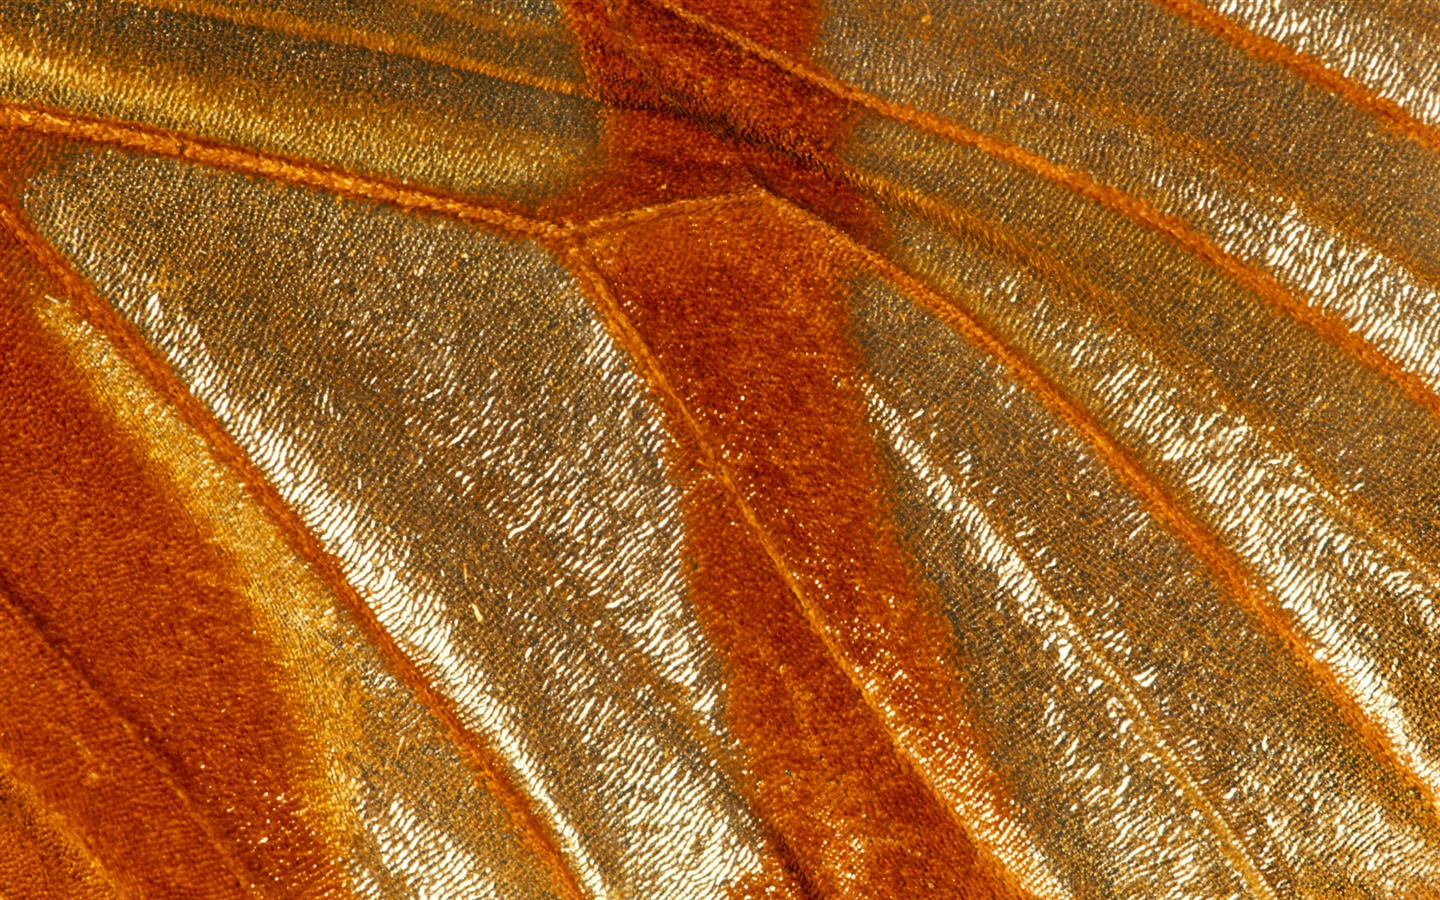 Colorful feather wings close-up wallpaper (2) #11 - 1440x900